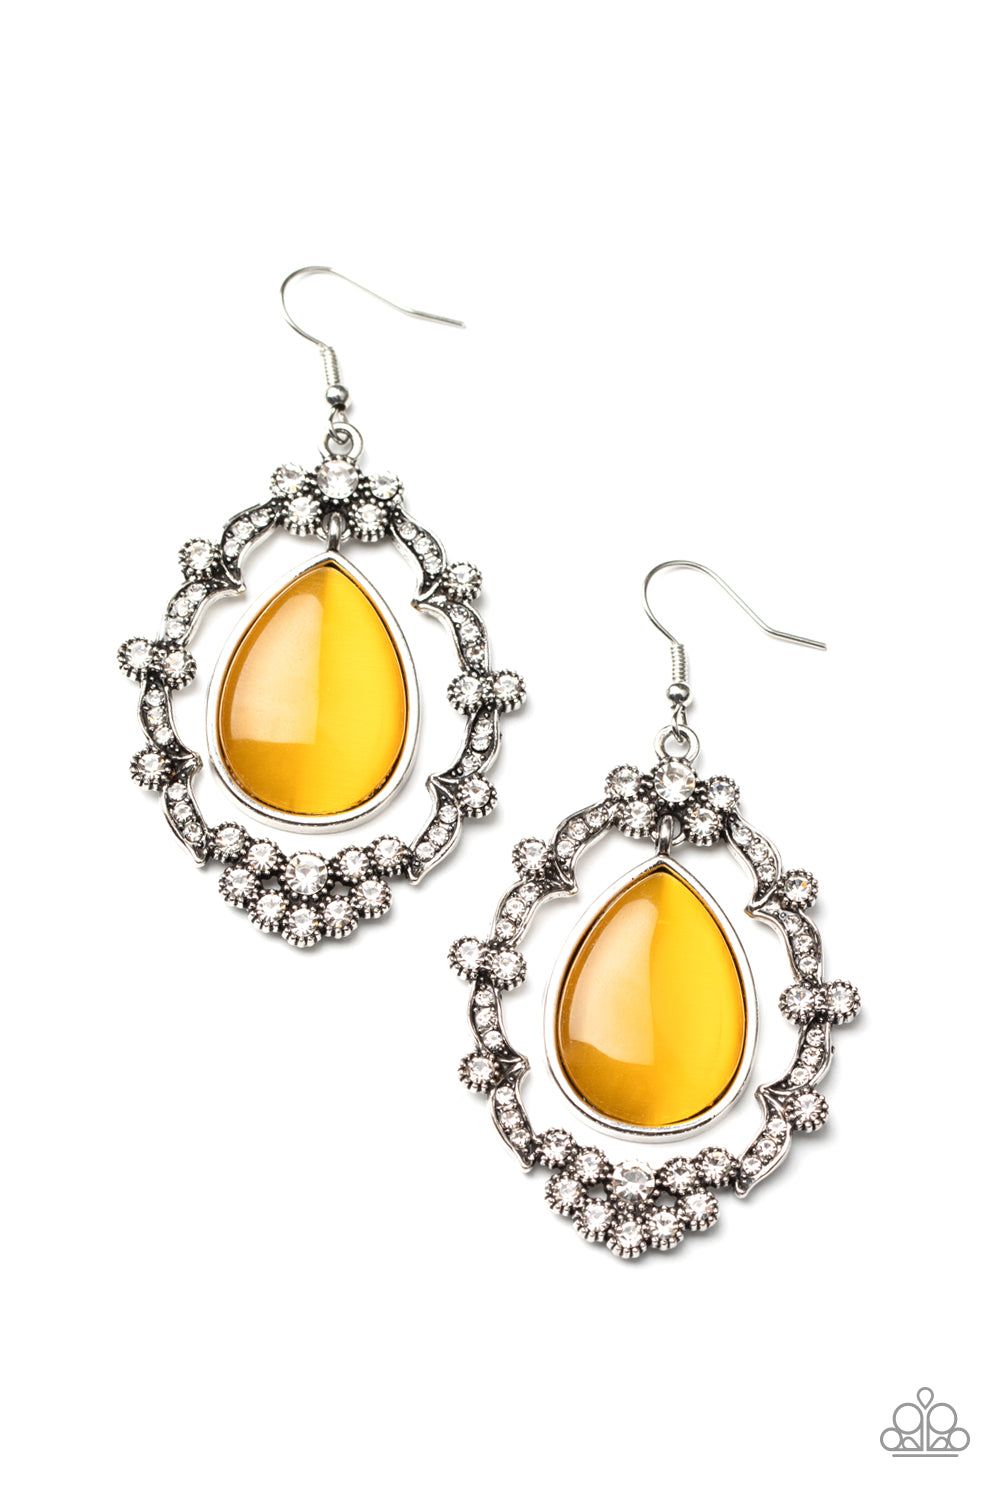 Paparazzi Accessories Icy Eden - Yellow Earrings - Lady T Accessories